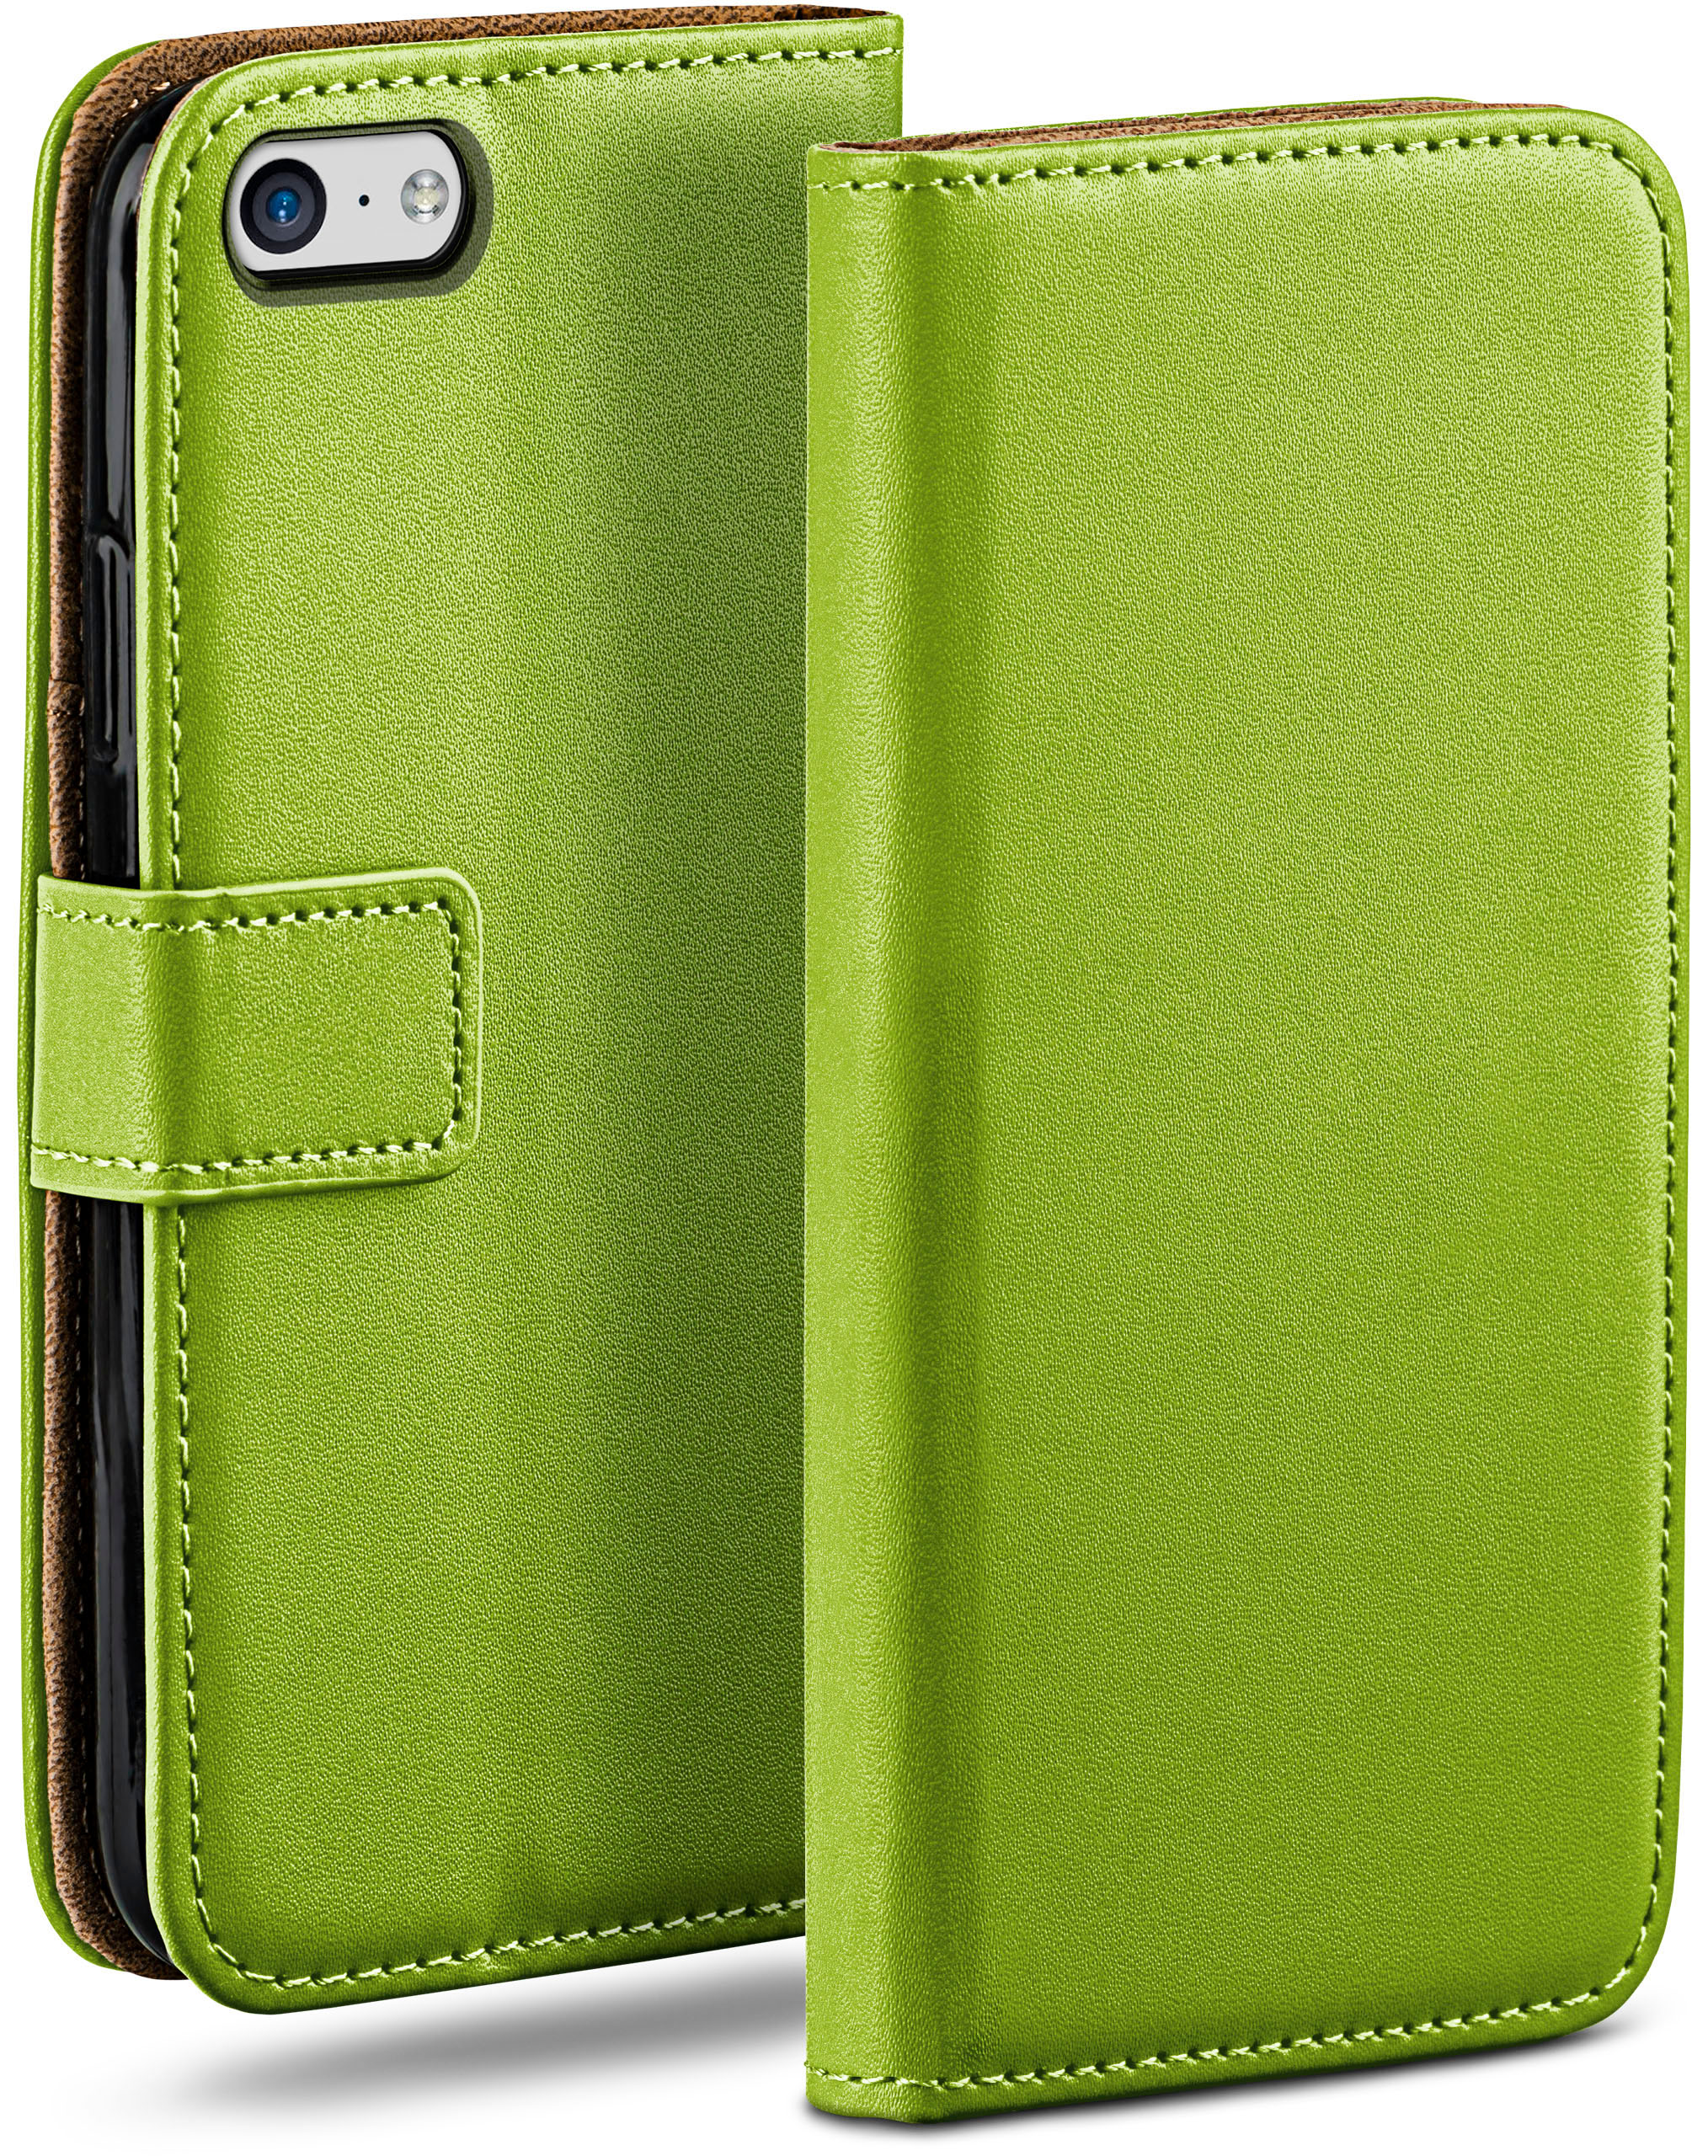 MOEX Book Bookcover, Lime-Green 5c, Apple, iPhone Case